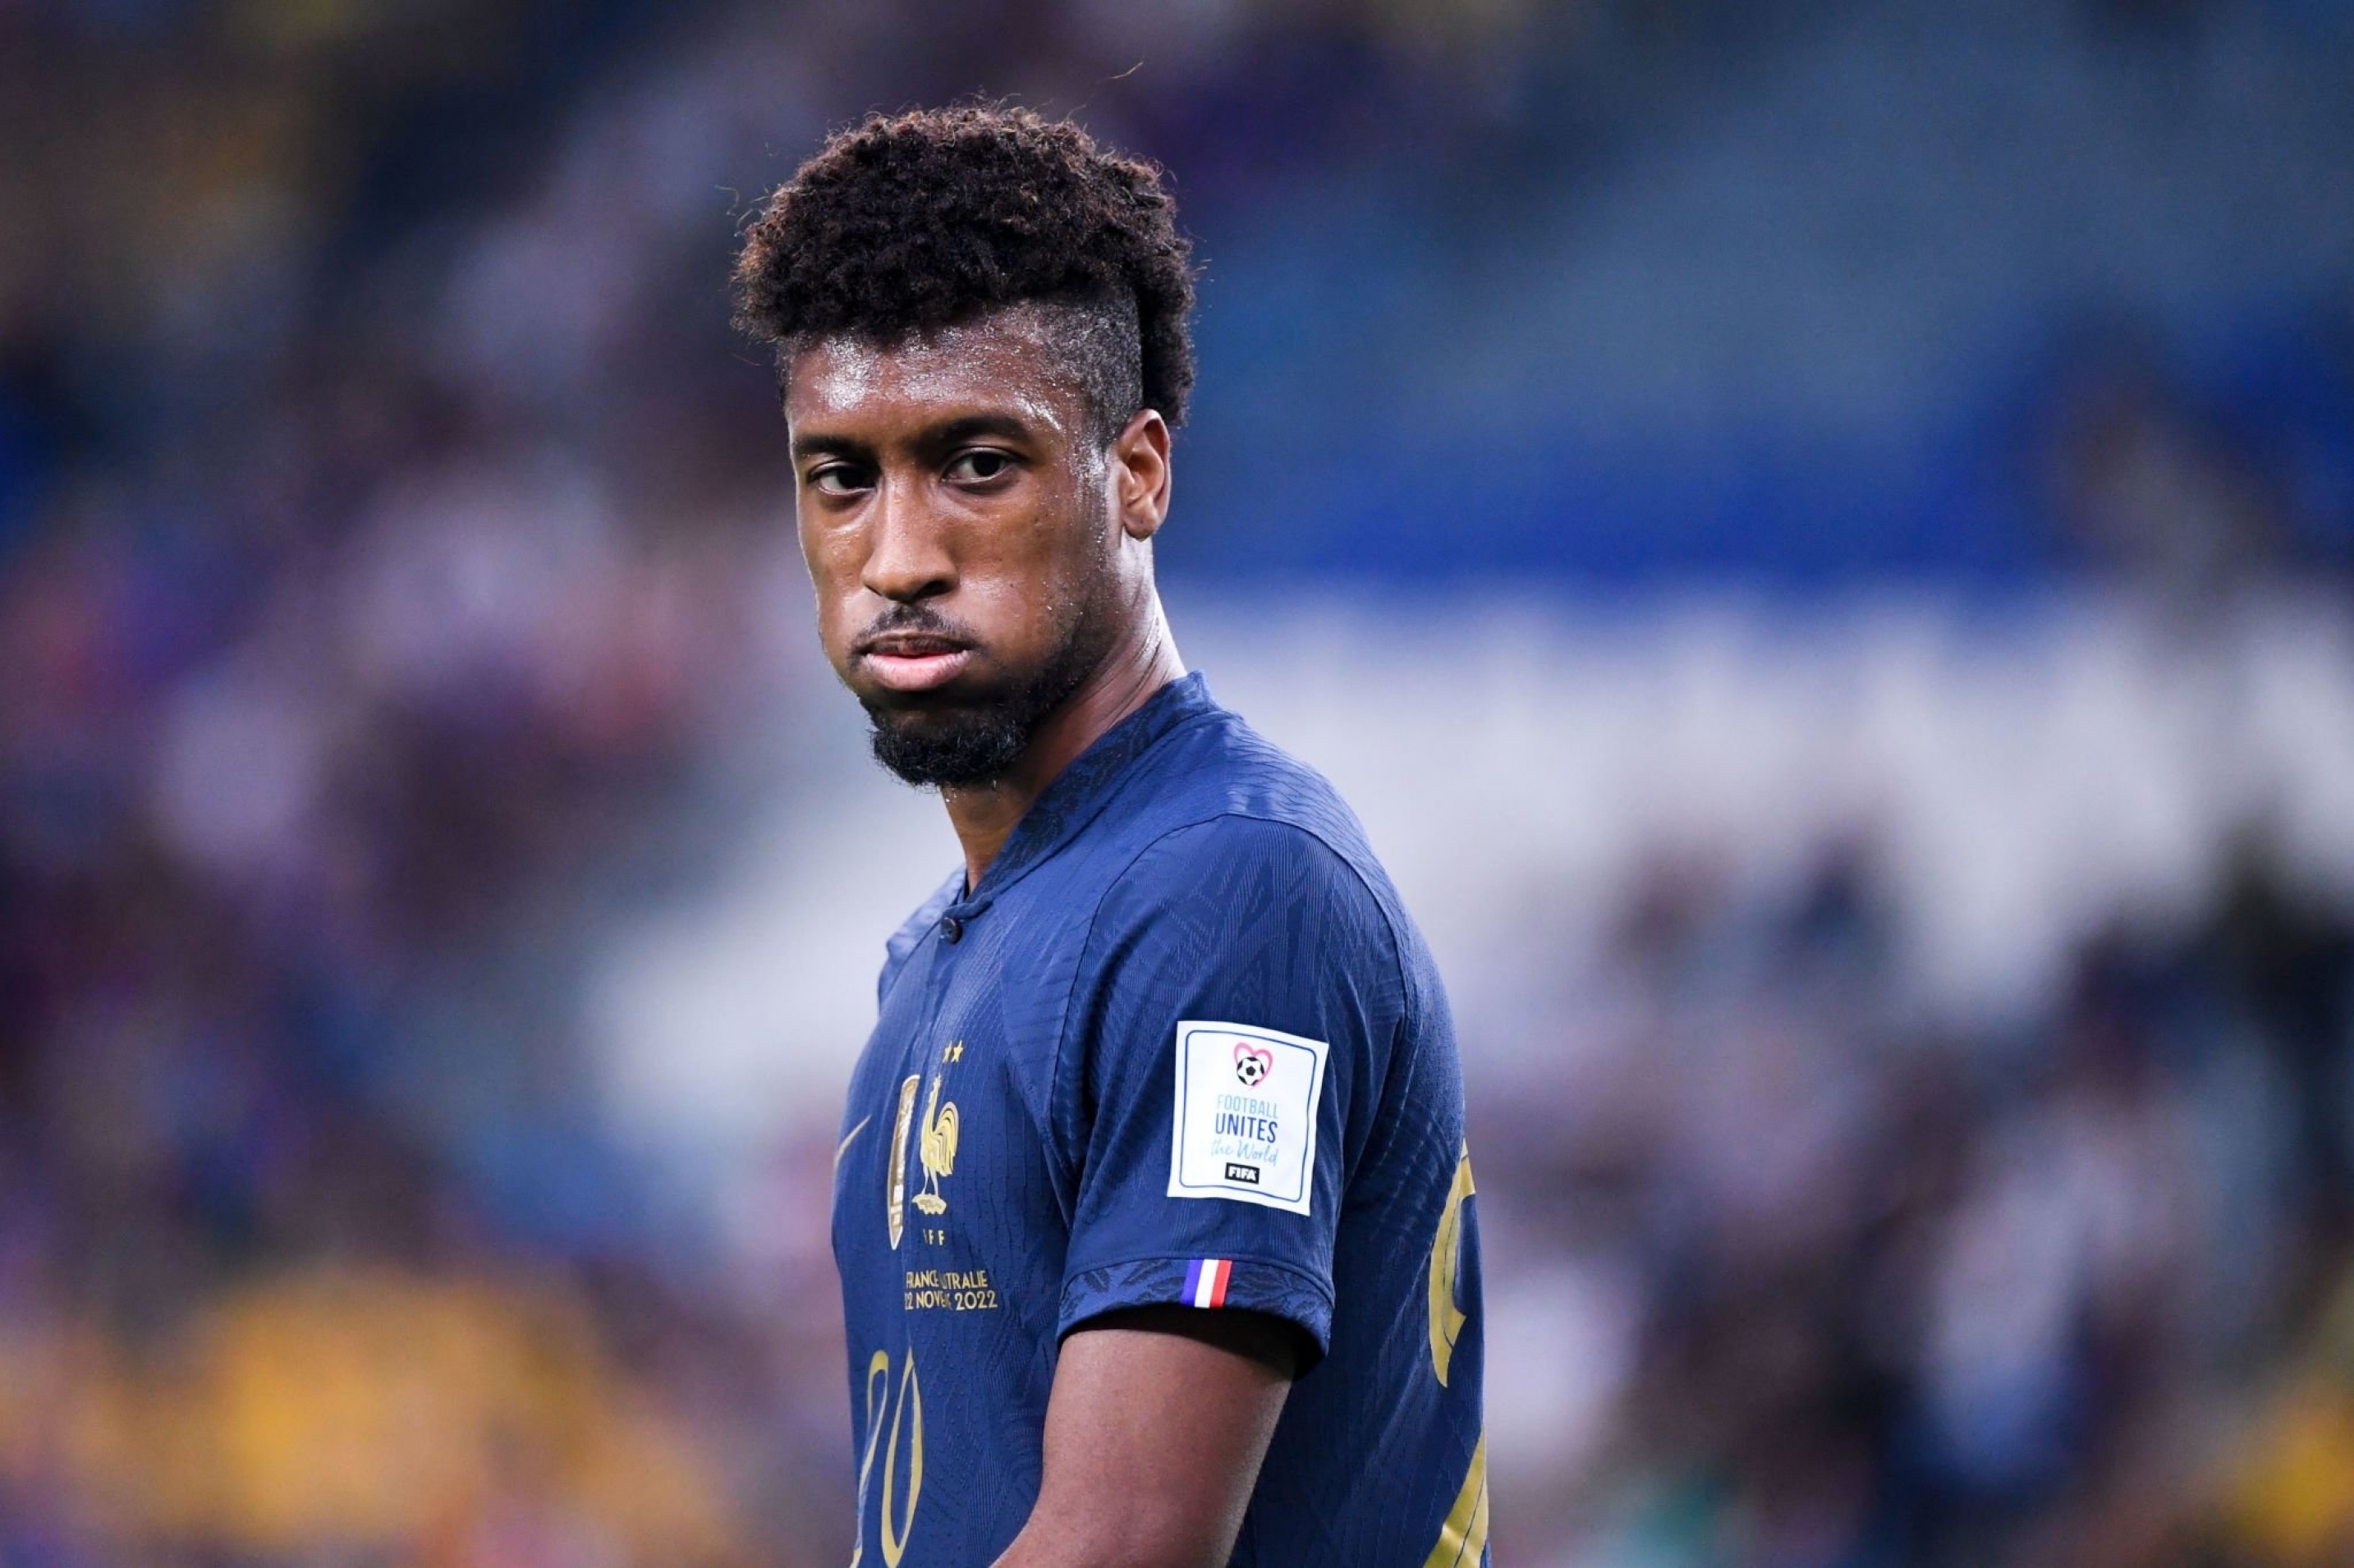 France vs Denmark: Another injury scare in France camp, Kingsley Coman leaves training session ahead of Denmark clash, Check OUT